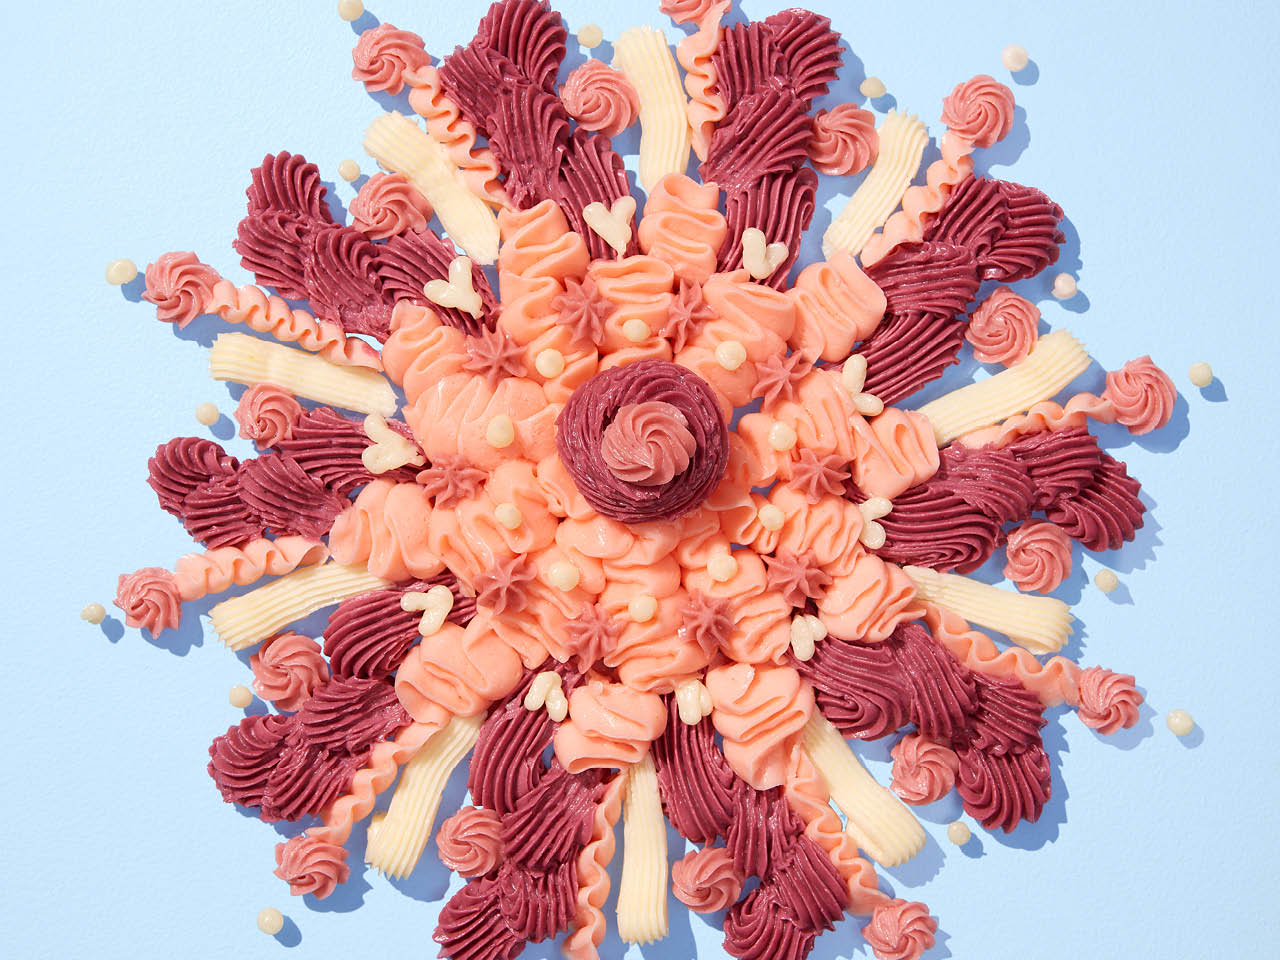 A flower design of pink, white and red icing on a baby blue background